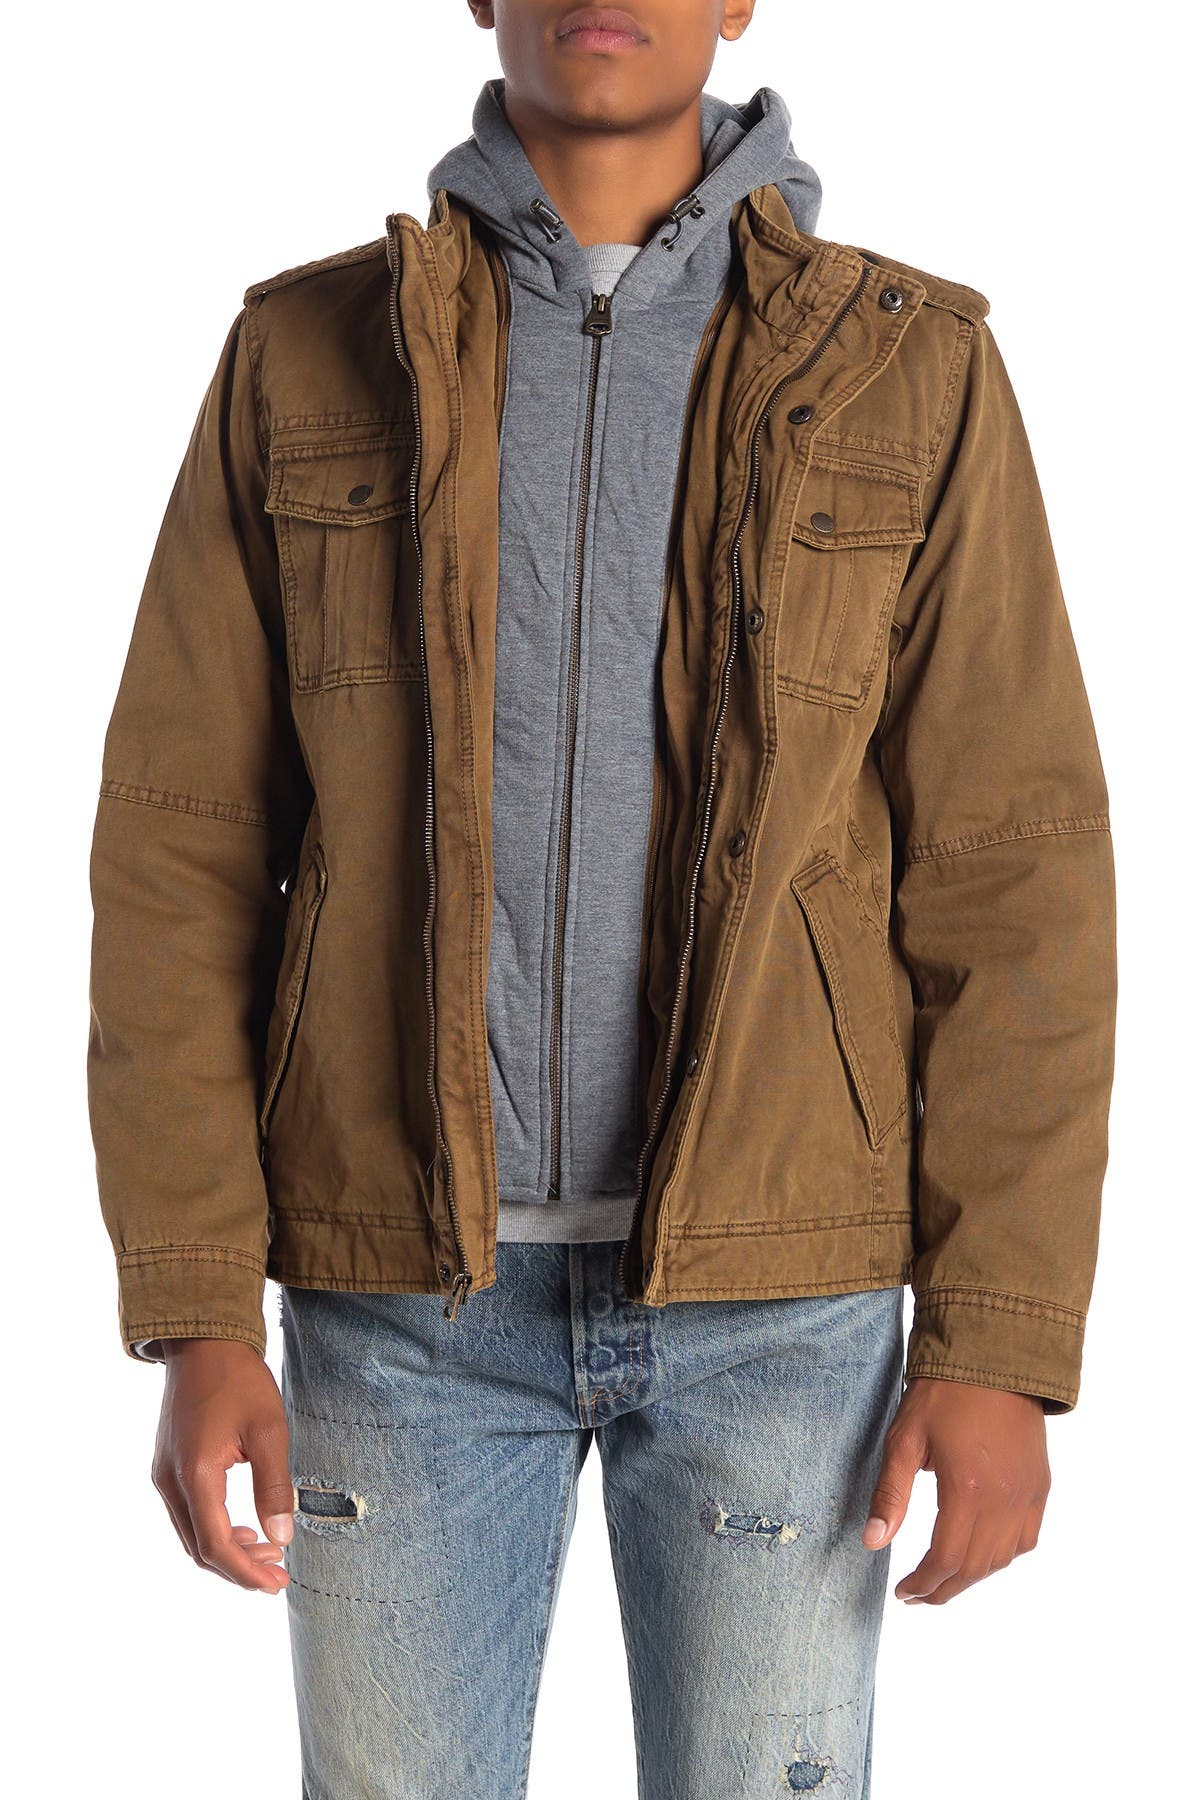 Levi's | Faux Shearling Lined Hooded Military Jacket | Nordstrom Rack